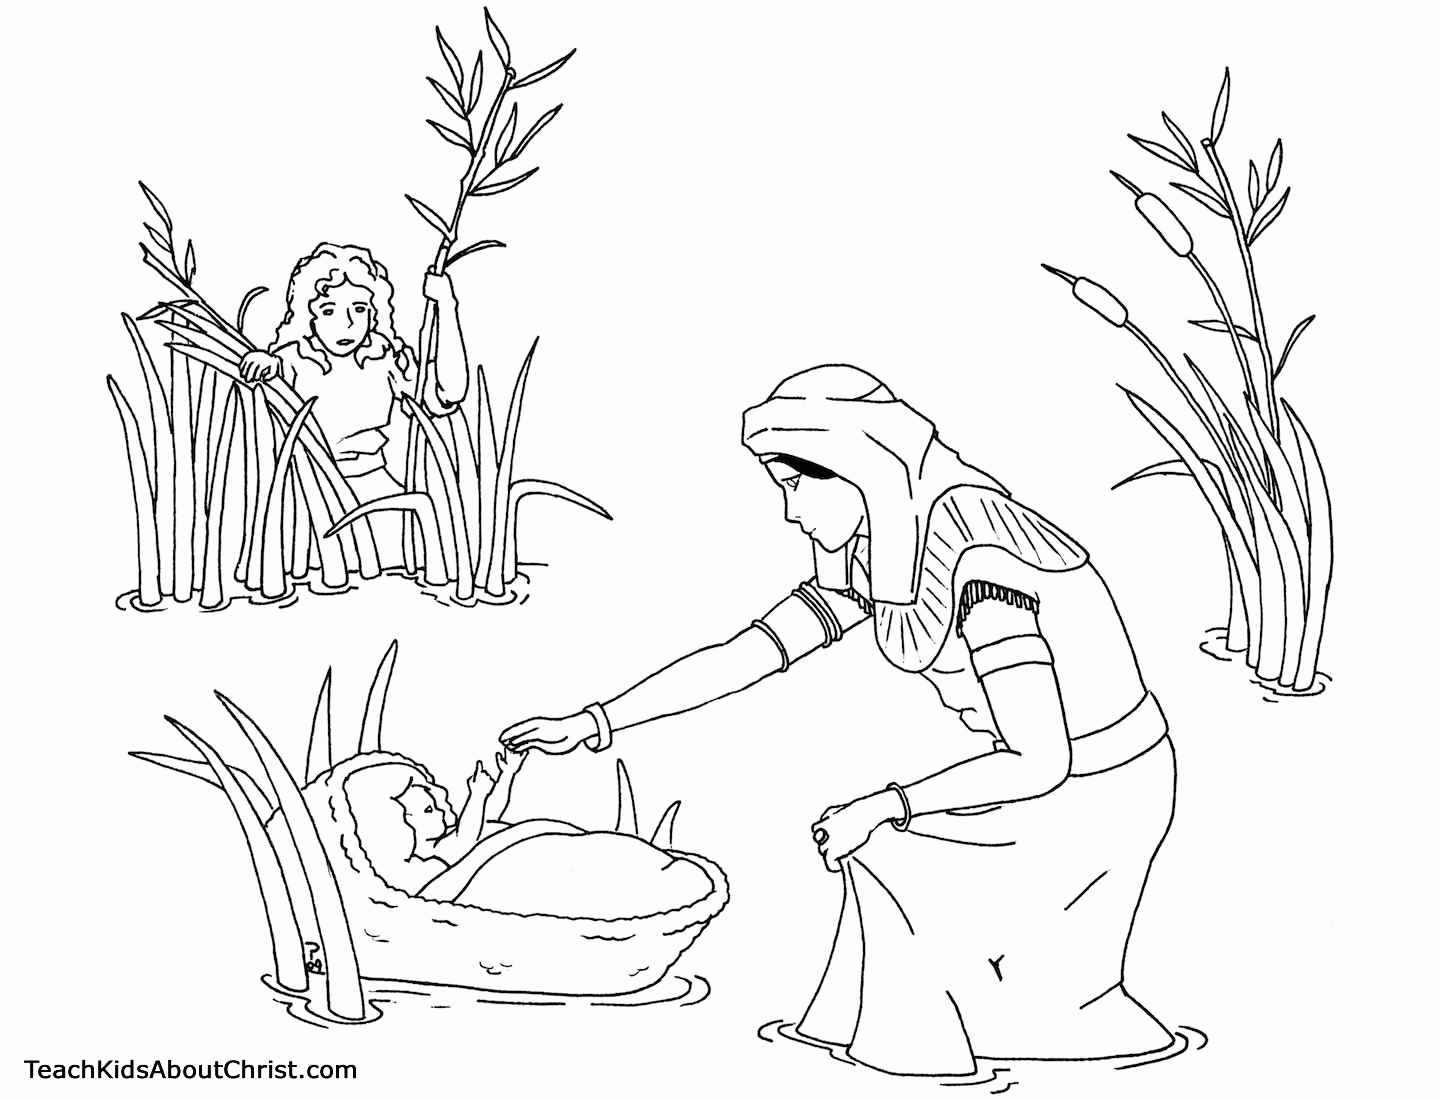 Moses Coloring Pages (17 Pictures) - Colorine.net | 23836